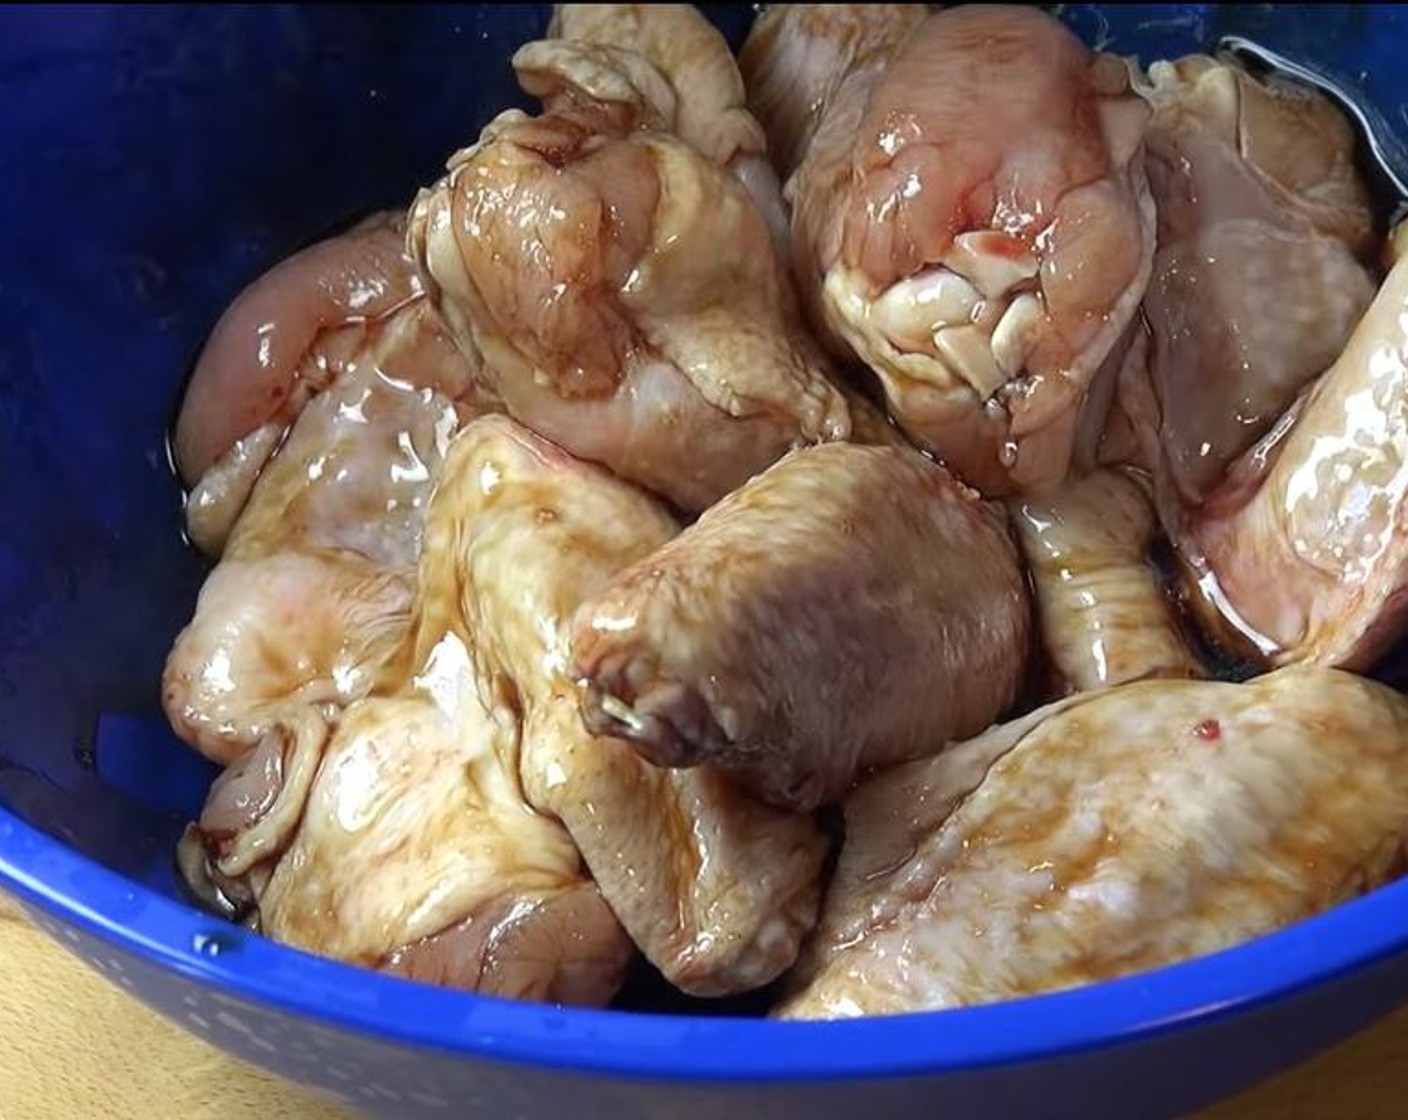 step 2 In a new bowl, pour marinade over Chicken Wings (6). Stir together with hand until chicken is evenly coated. Use a glove to avoid messy hands.